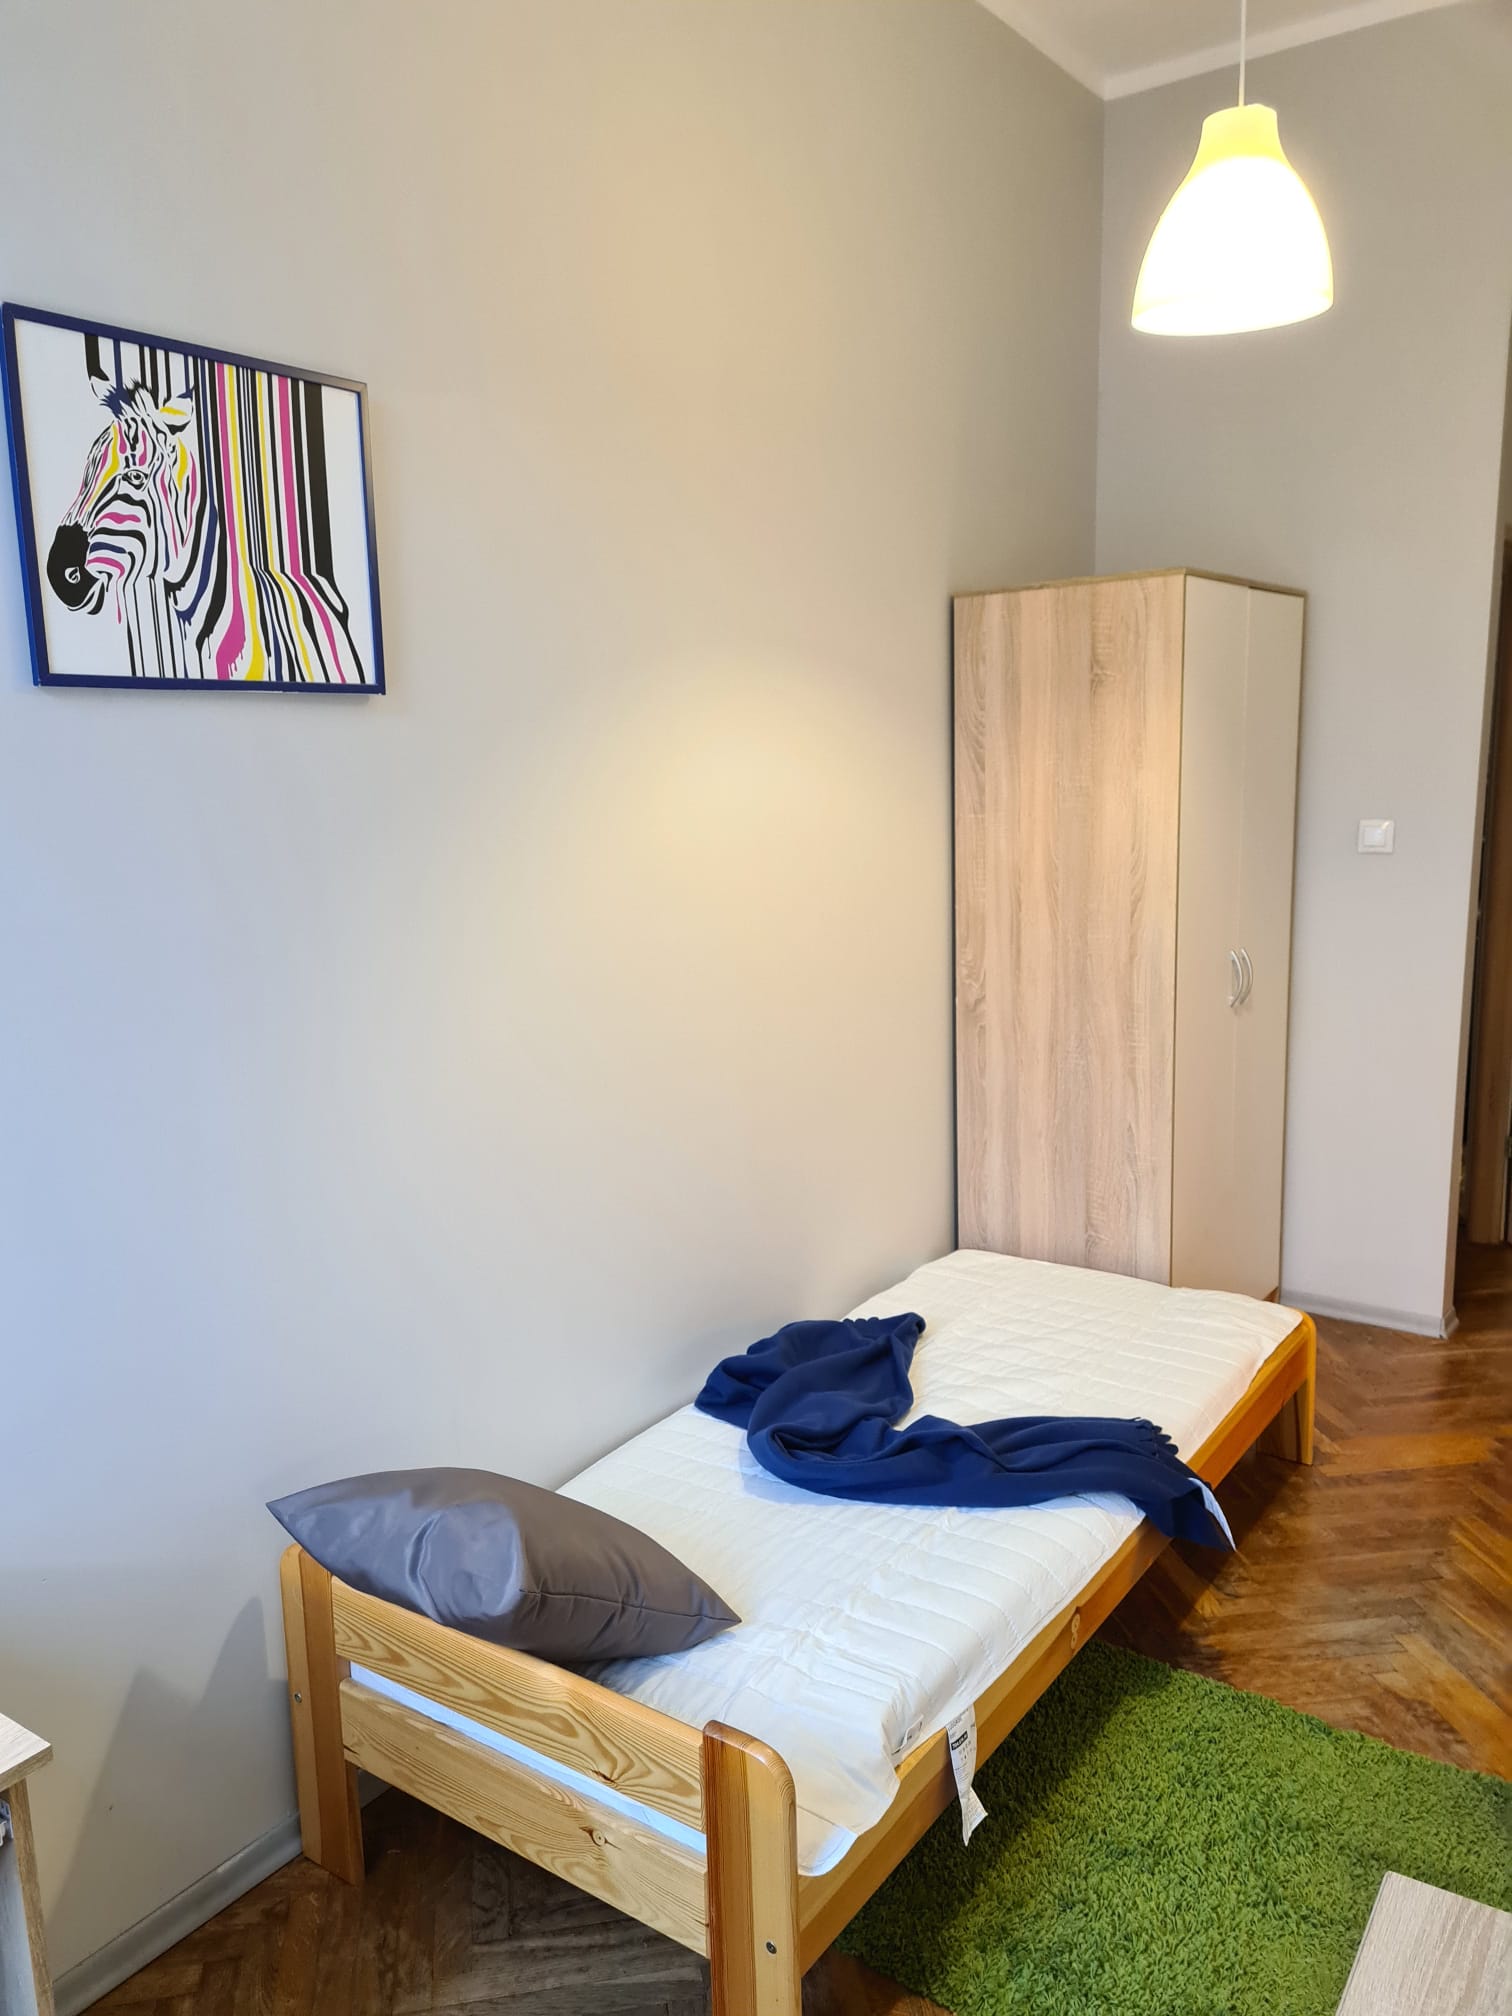 Medium size student room in the heart of the city